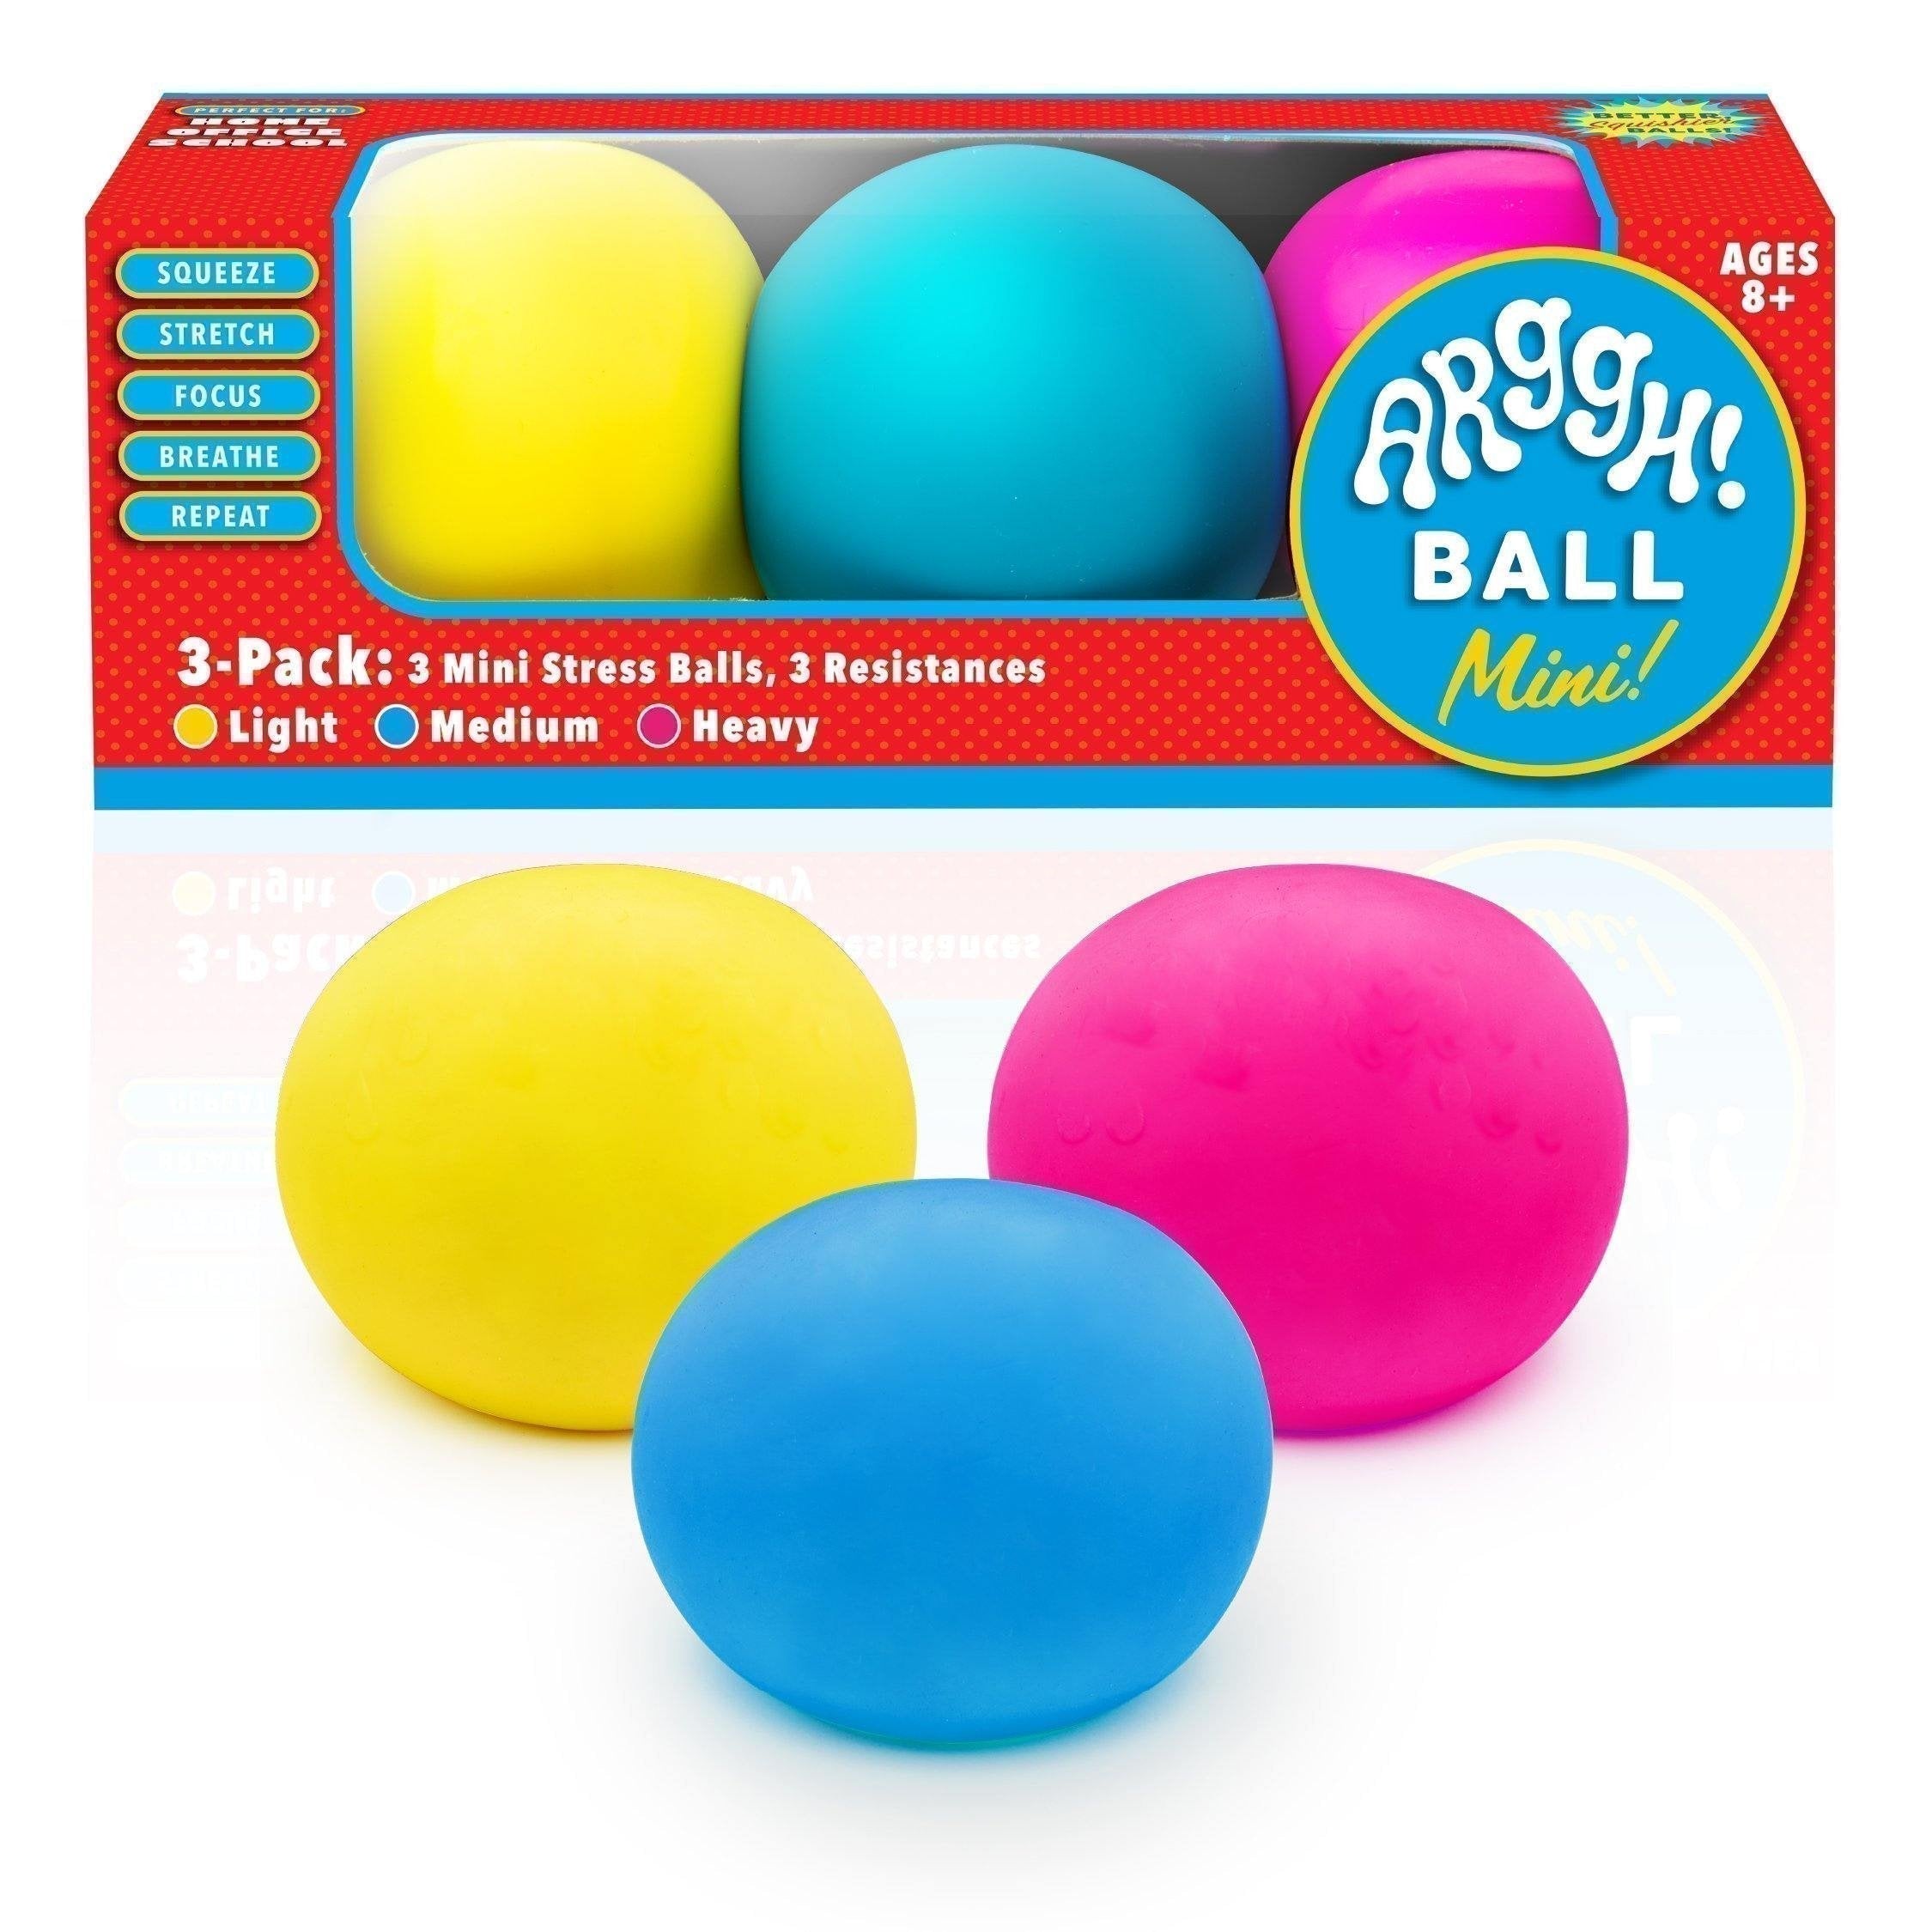 Squeeze Goo Balls - Set of 3, Vest your stress and anxiety out with these 3 stress balls filled with glitter. Use it as a calming toy to help kids relax and develop focus. These glitter stress balls are fun to play and easy to keep clean. 3 Mini Stress Balls: Each pack of these mini stress balls include 1 light (yellow), 1 medium (blue), and 1 heavy (pink) stress ball resistances - perfect for both physical and emotional stress relief Color Changing Squishy Balls: Vent stress, anxiety, anger or use as a for